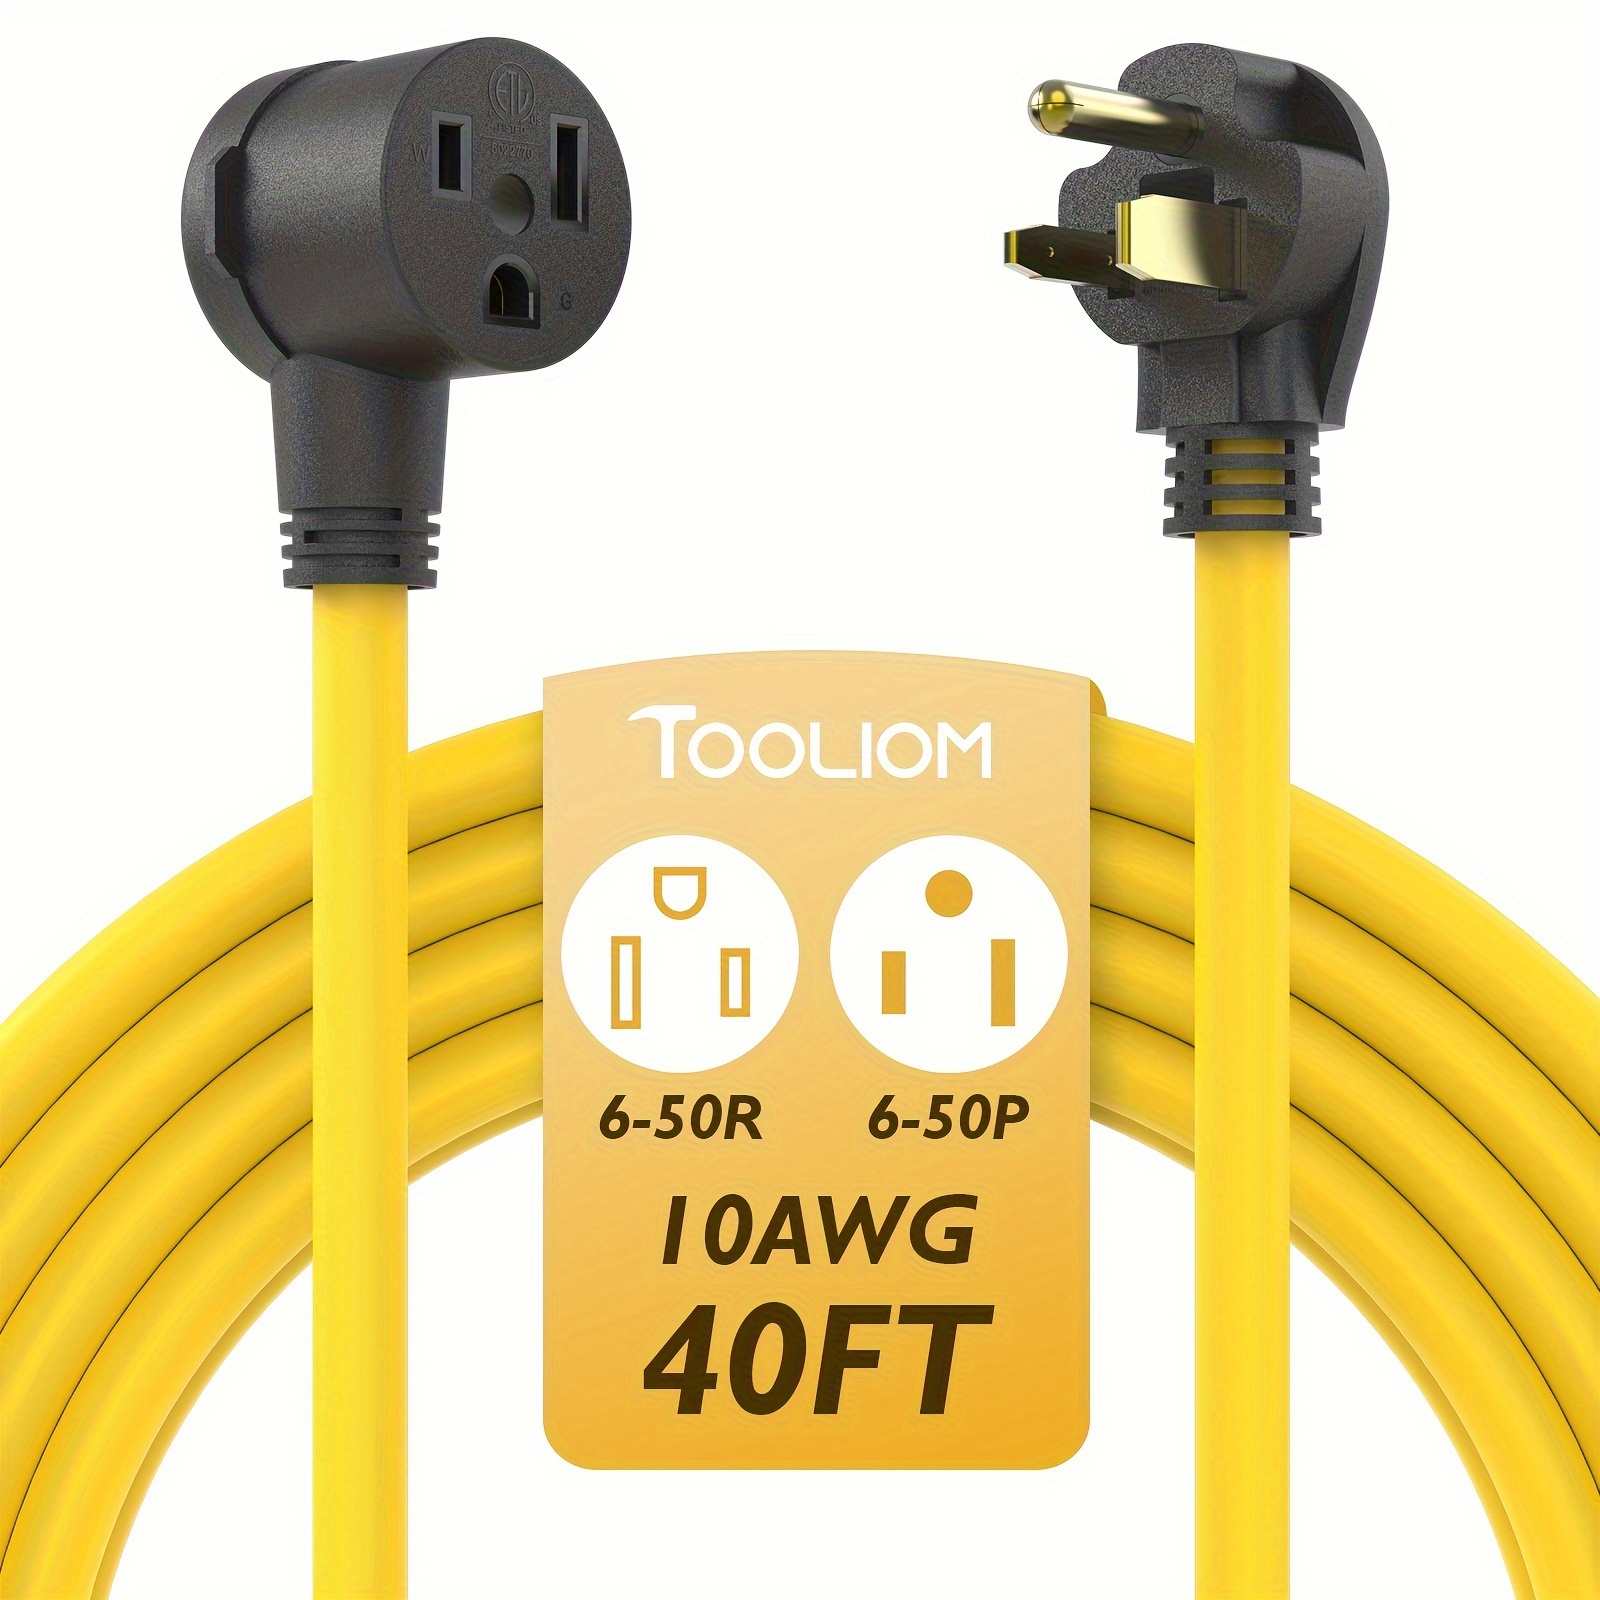 

Tooliom 40ft 250 Volt Welder Extension Cord 10 Awg Nema 6-50p To 6-50r Power Extension Cord For Welding Machines With Etl Approved